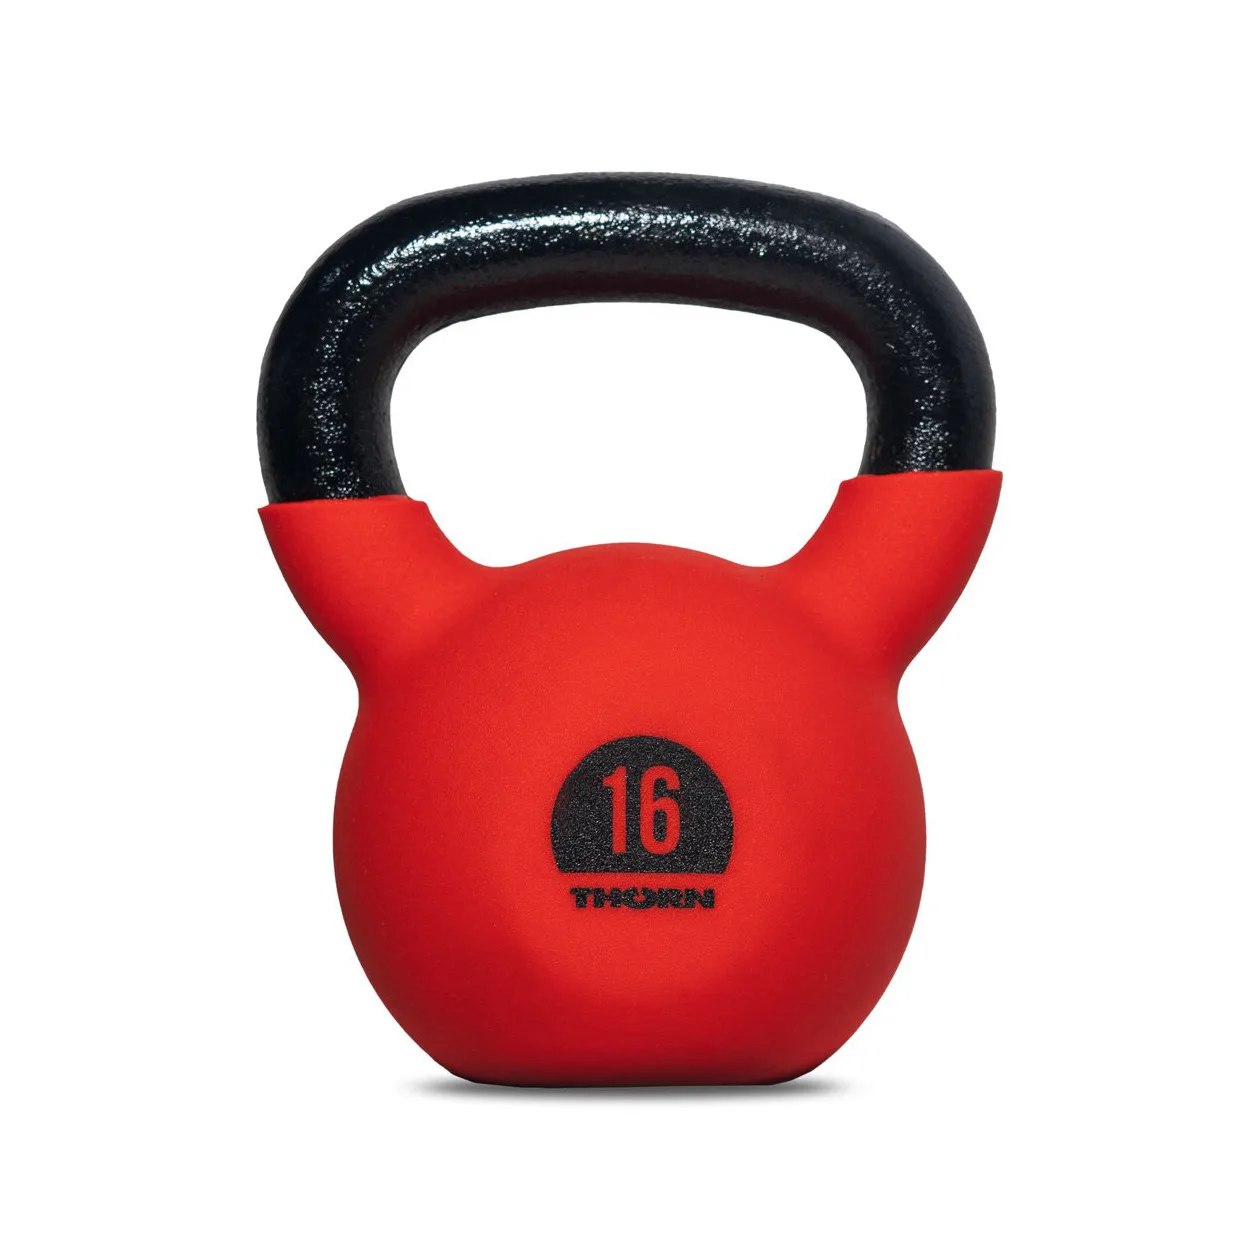 Cast-iron kettlebell with rubber protective coating 16 kg – Thorn Fit, Crossfit equipment